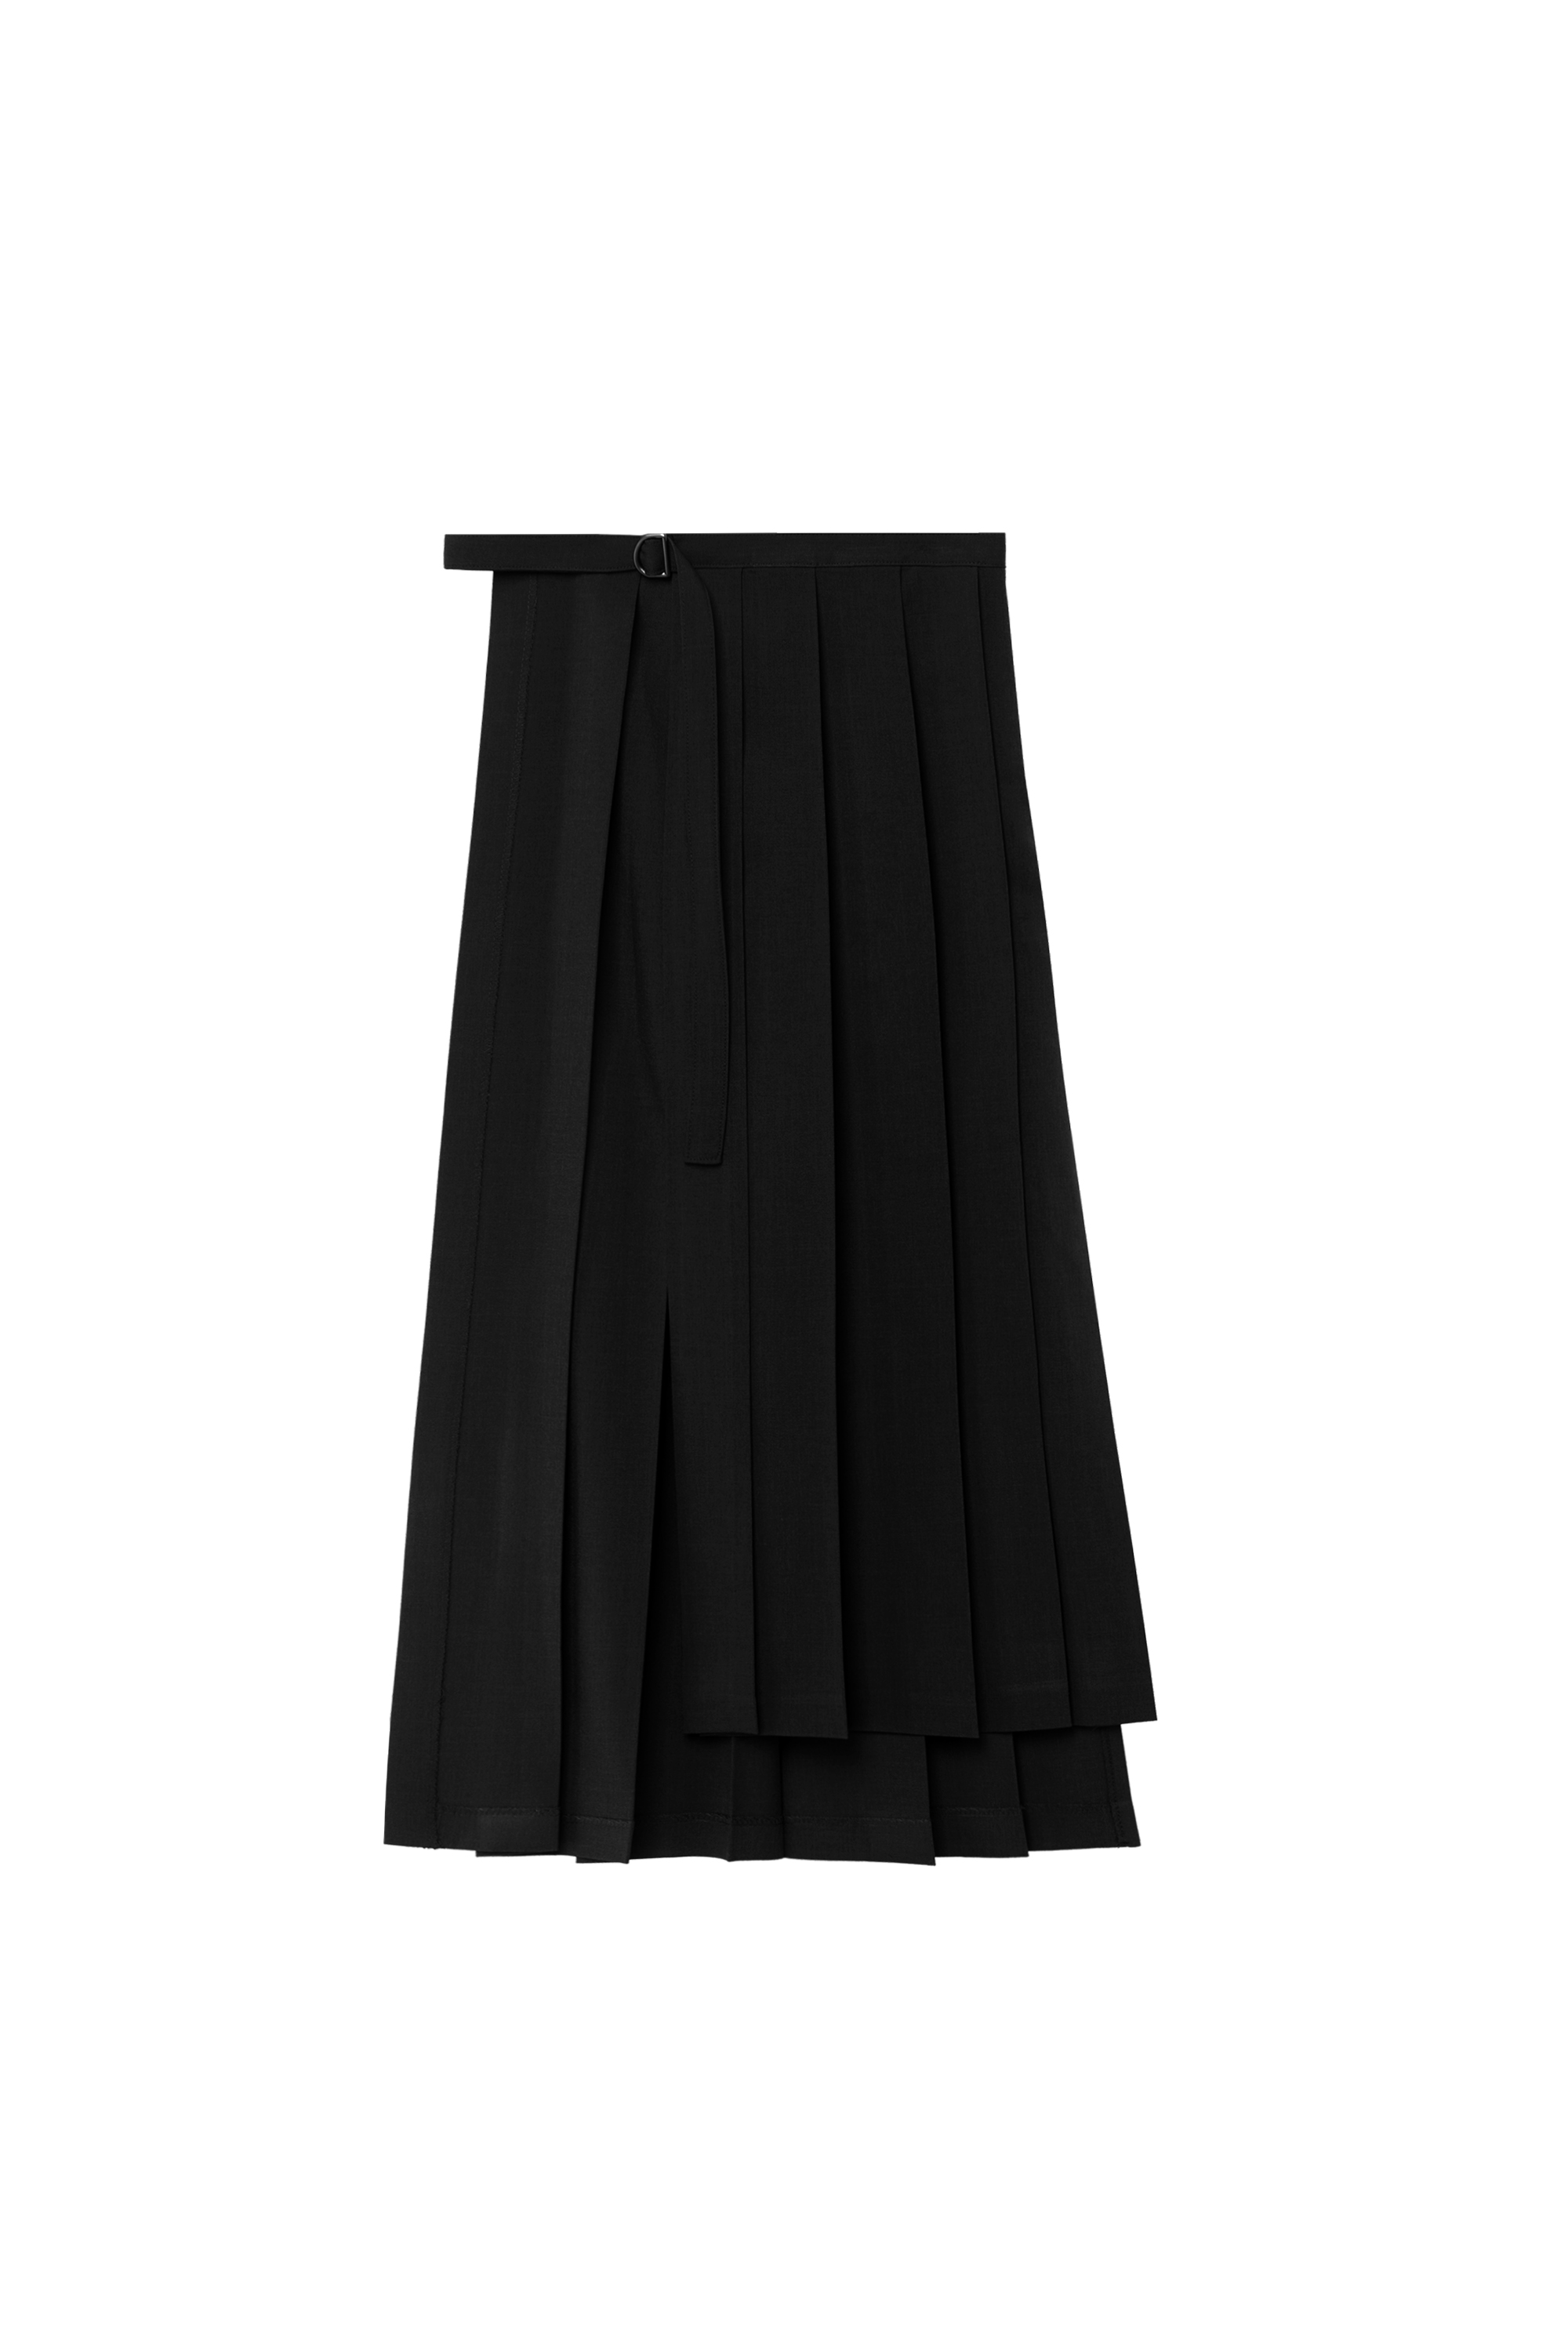 DOVE LAYER PLEATED SKIRT BLACK